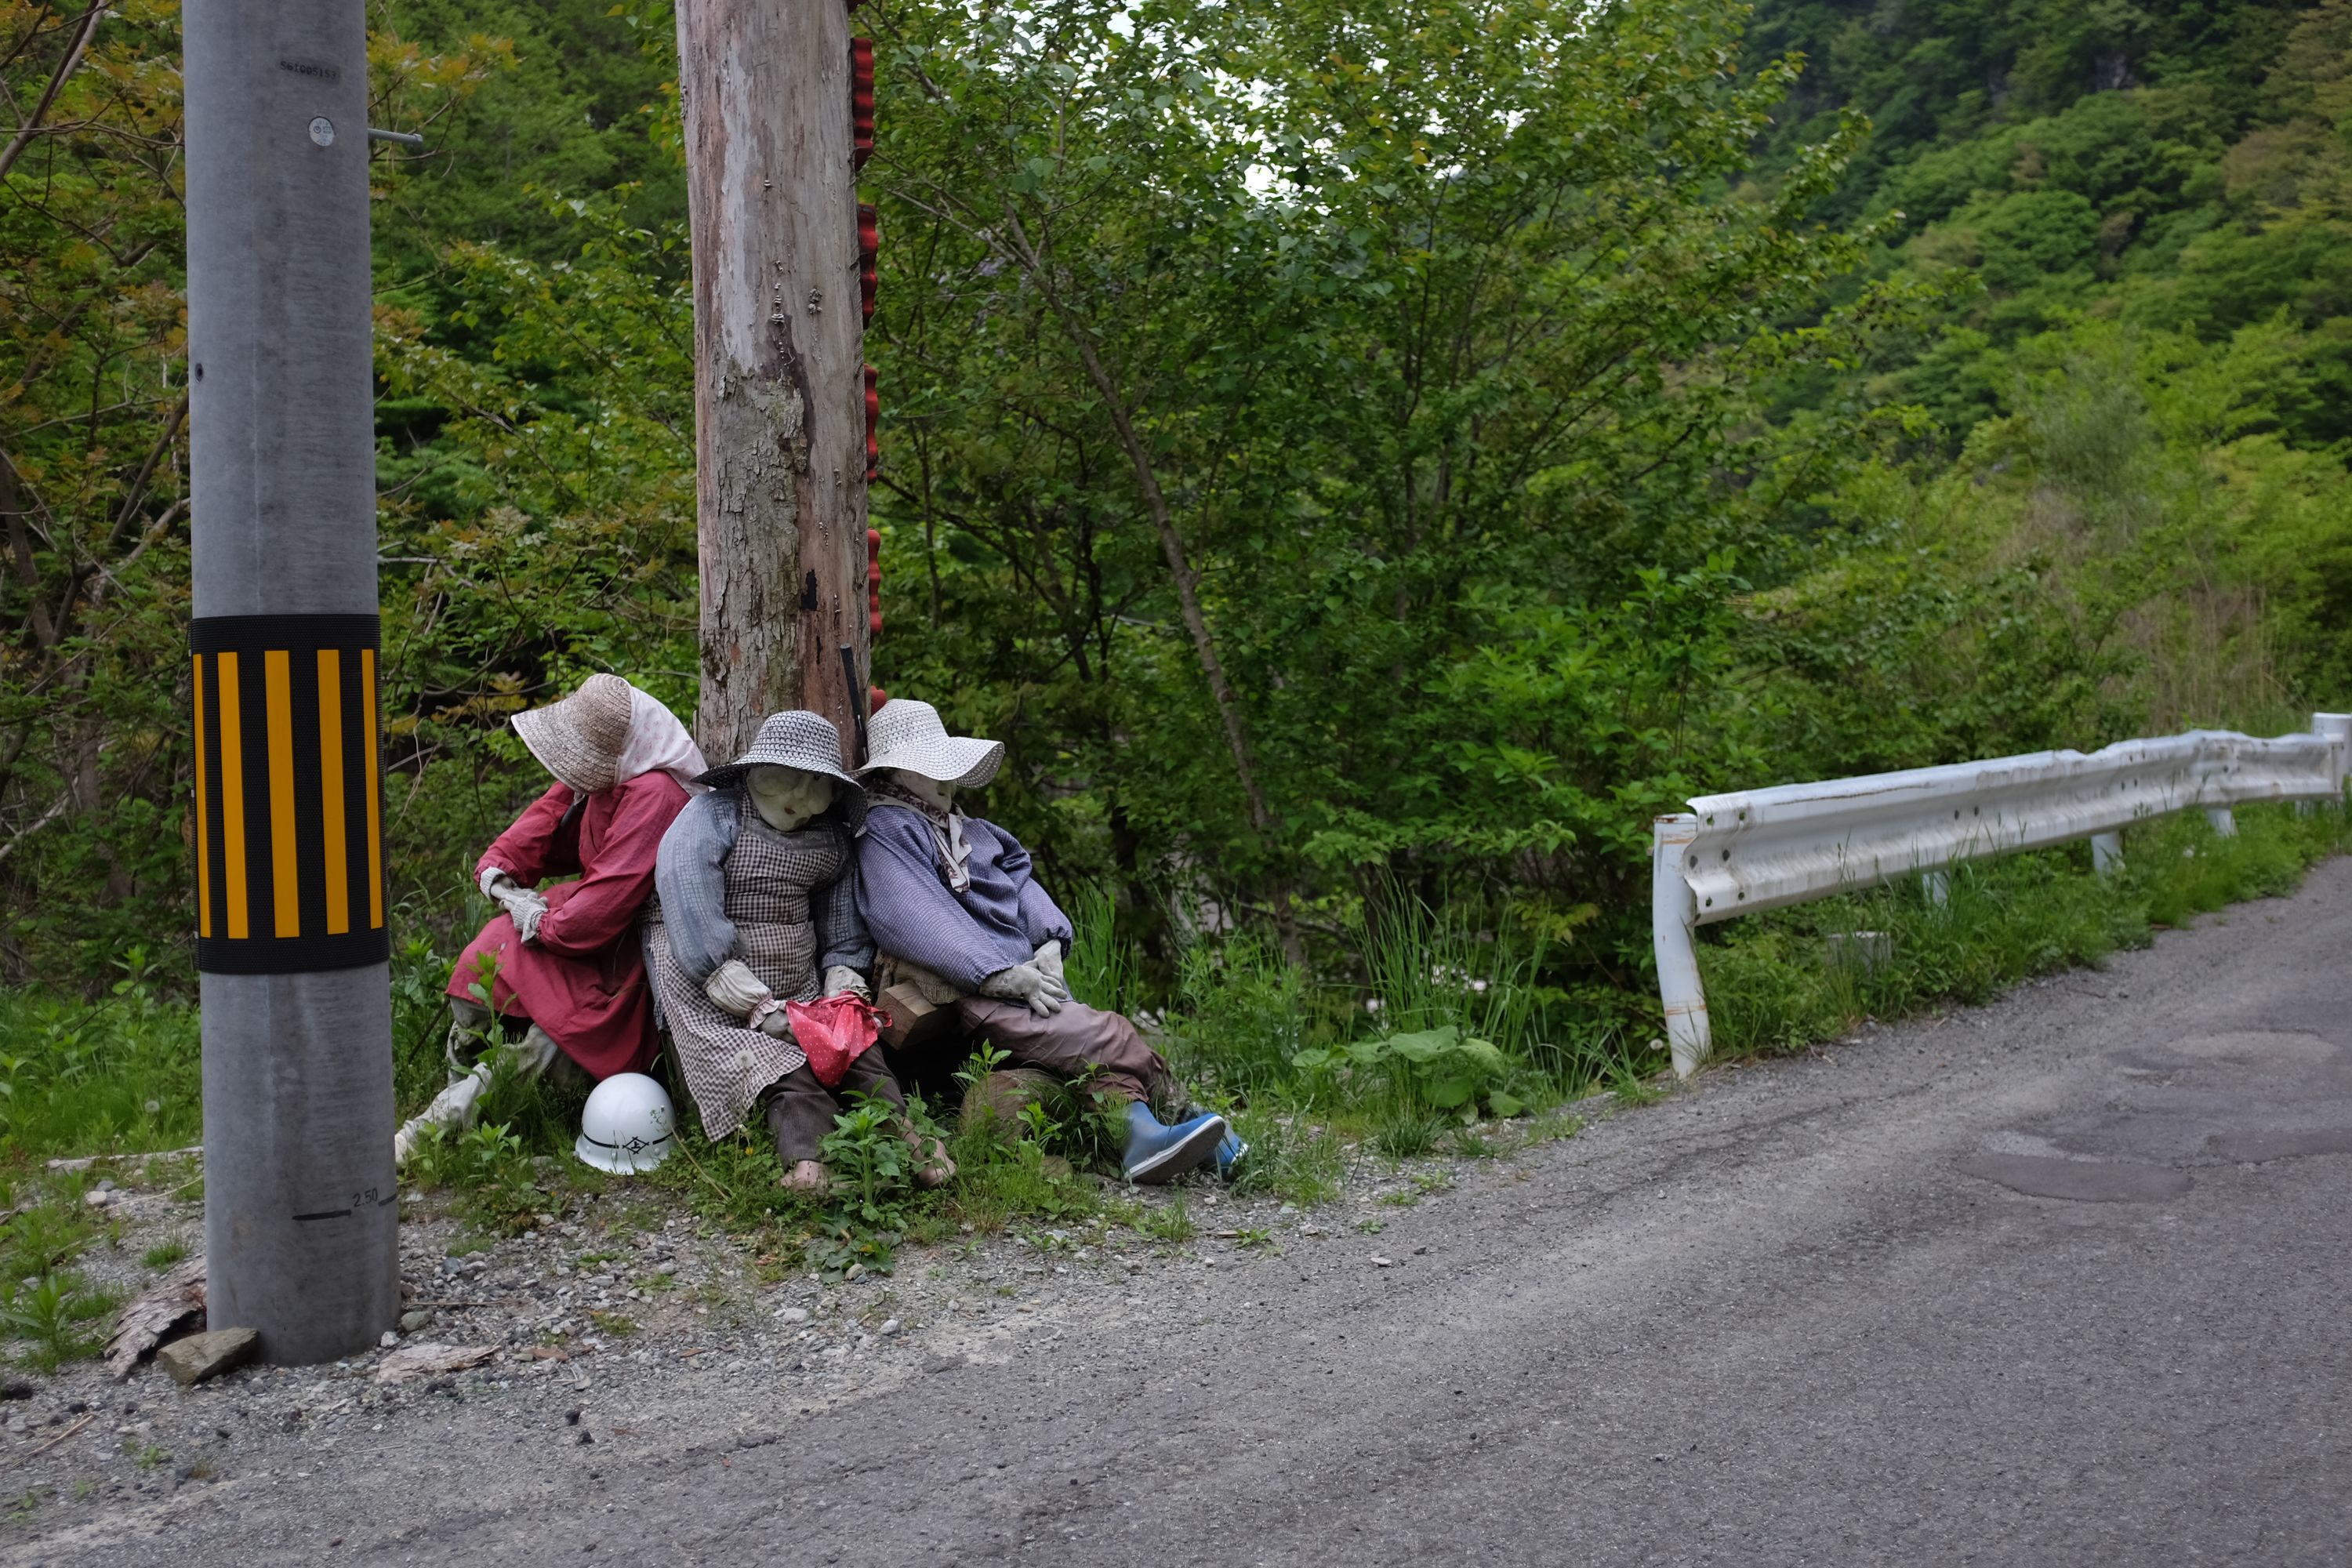 Three human-sized dolls dressed up as village women sit on the ground around a wooden telephone pole.